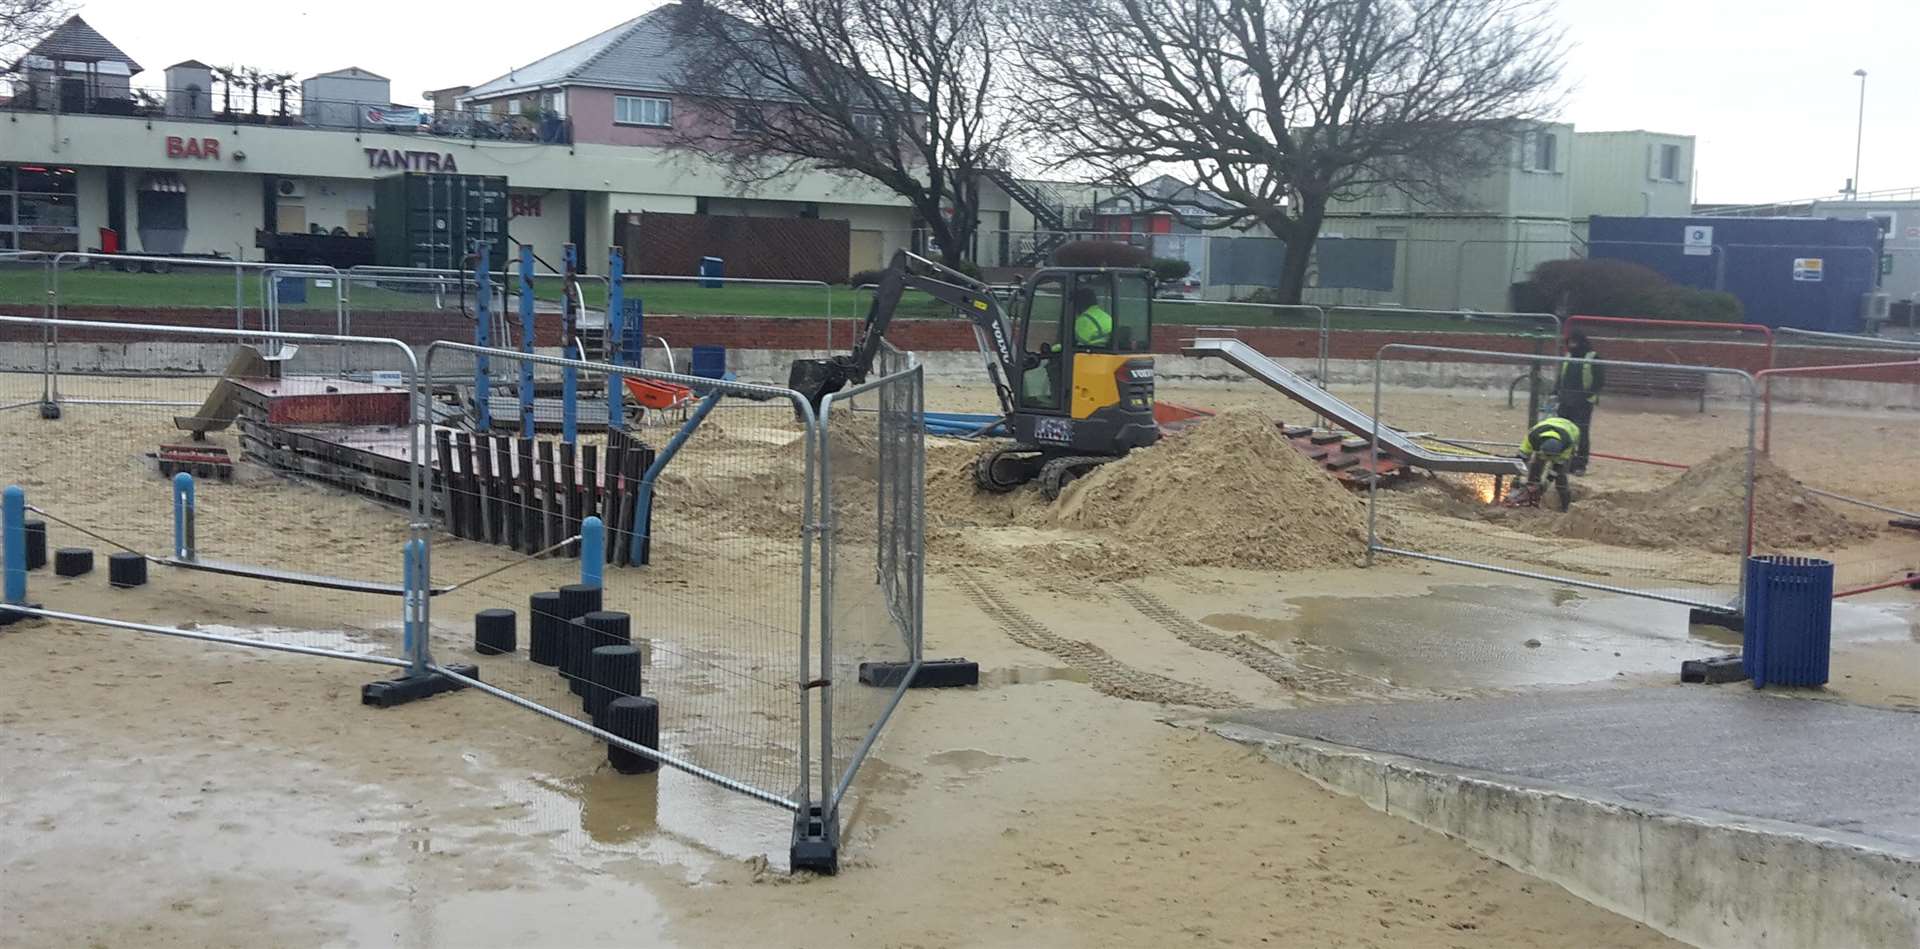 A digger and angle grinder were brought in to replace the 33-year-old equipment